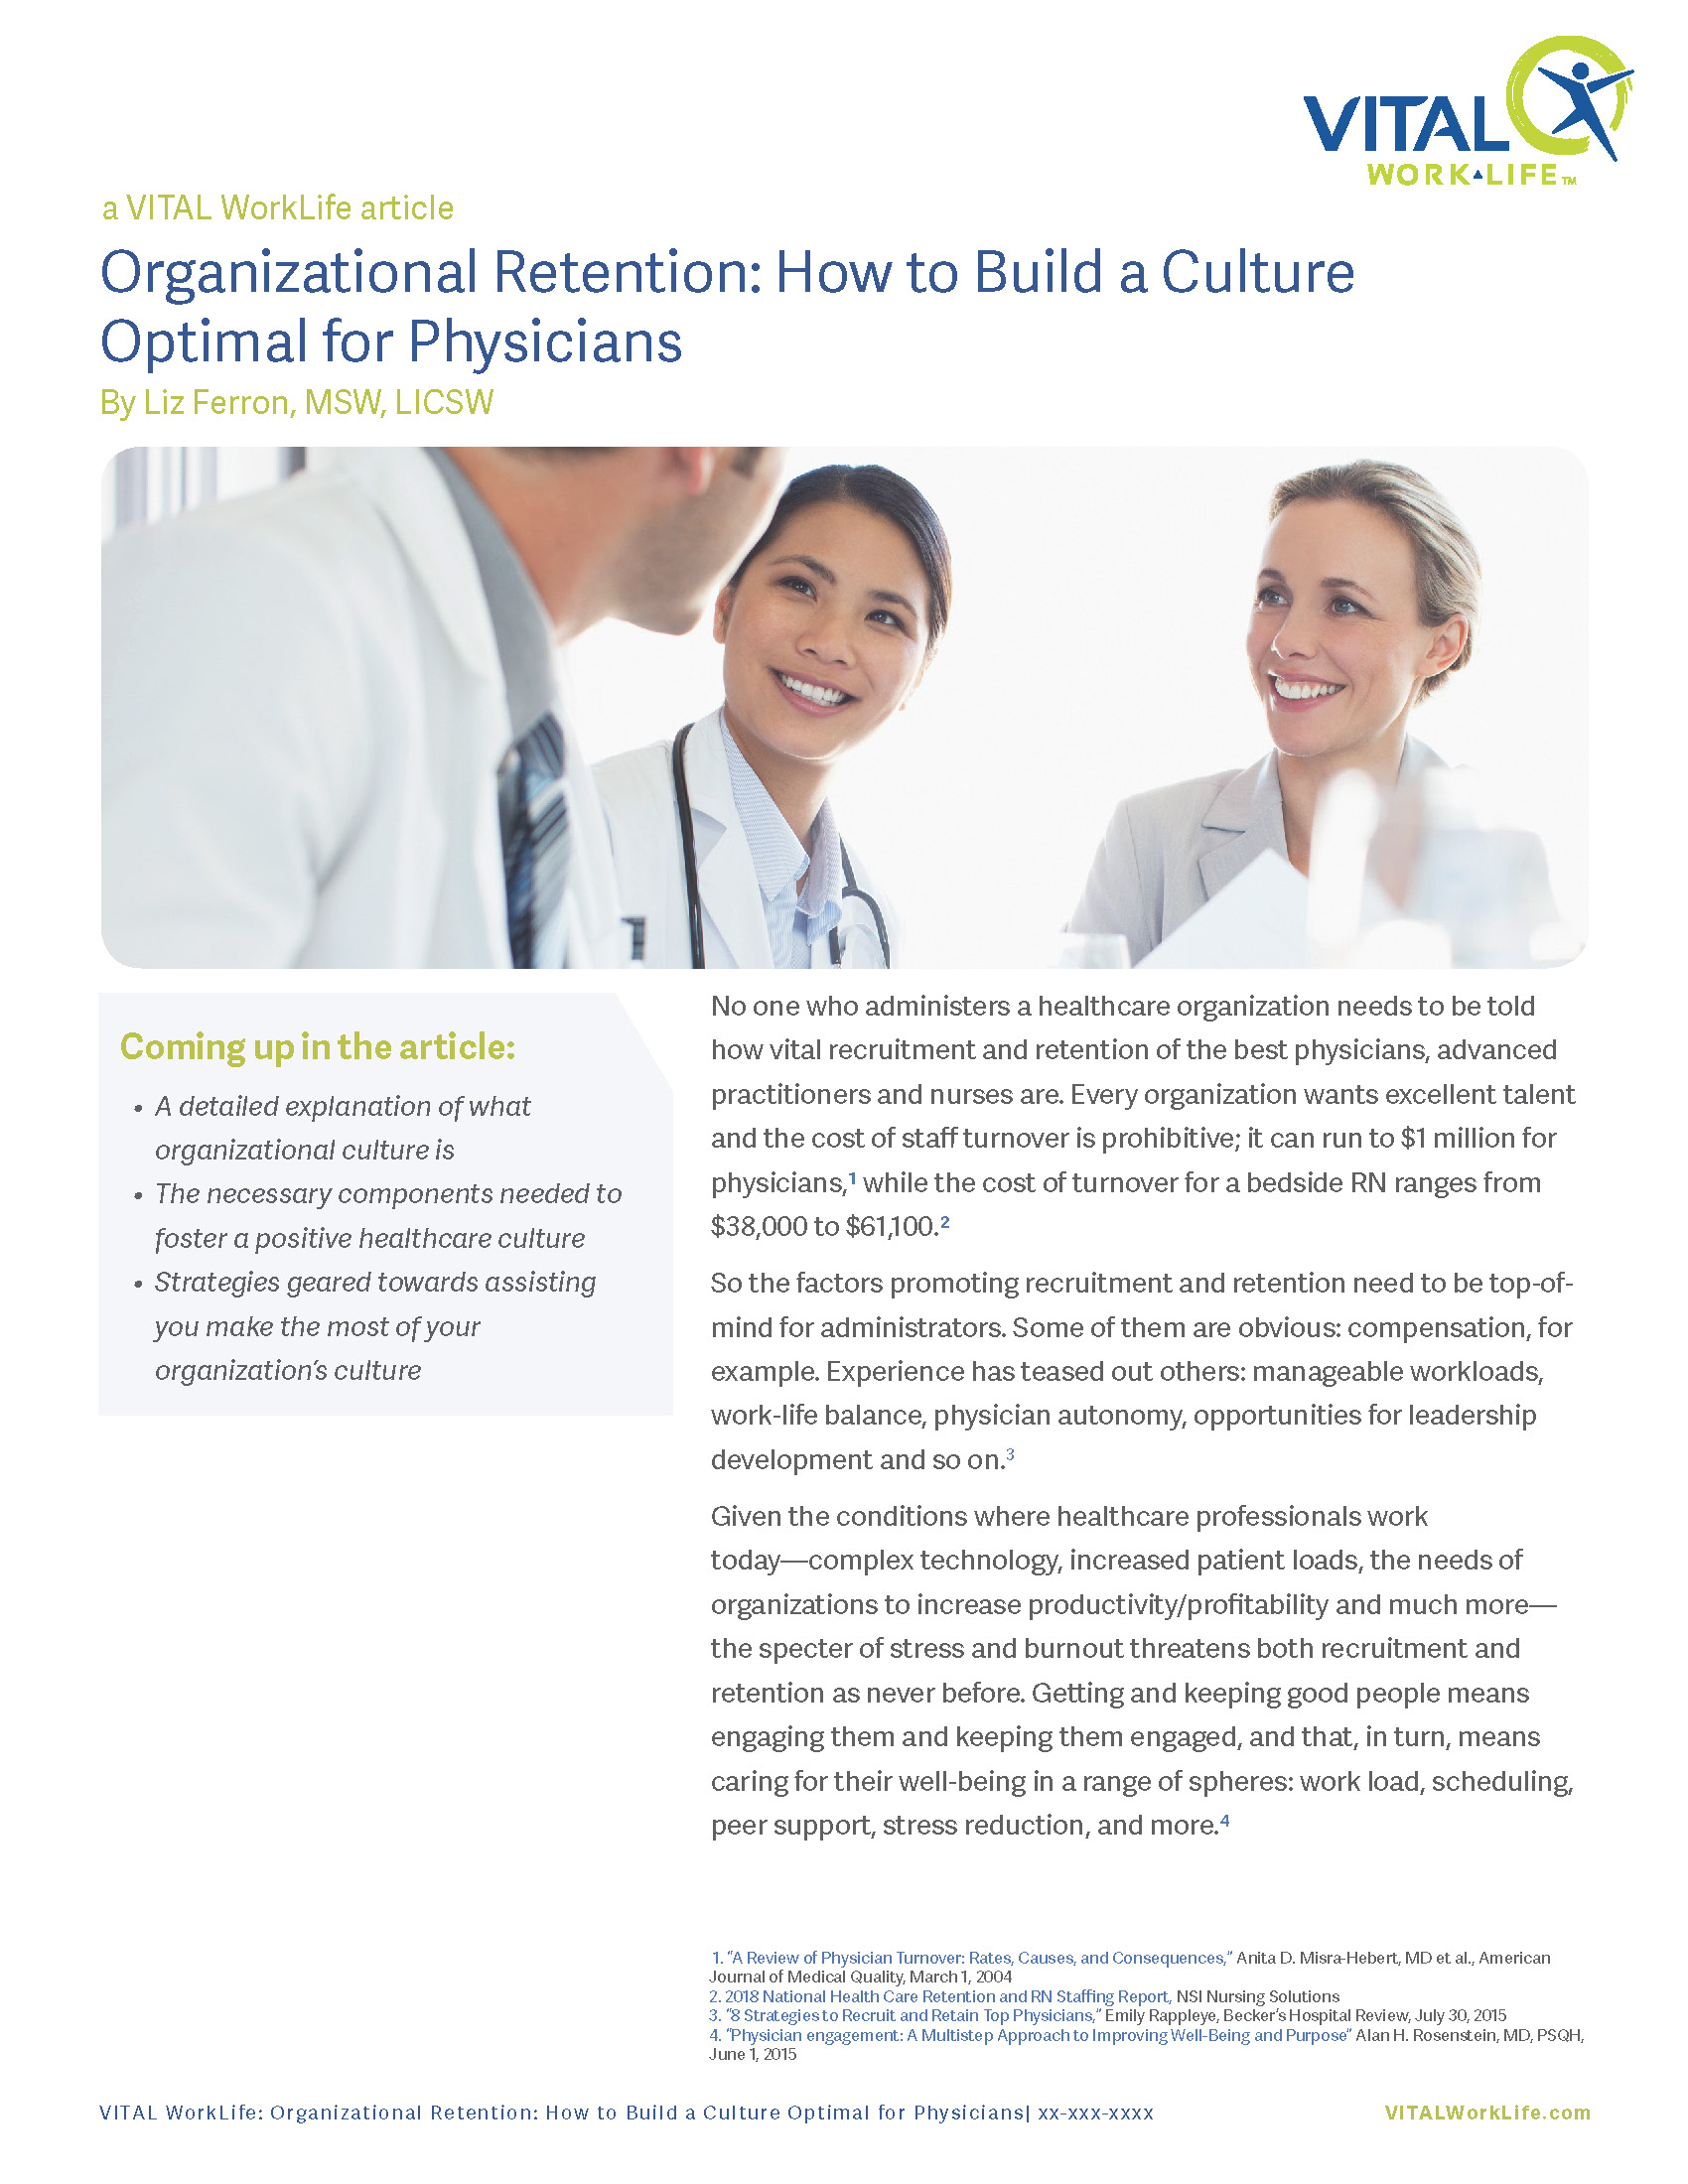 Image-Cover-of-Article-Organizational-Retention-How-to-Build-a-Culture-Optimal-for-Physicians